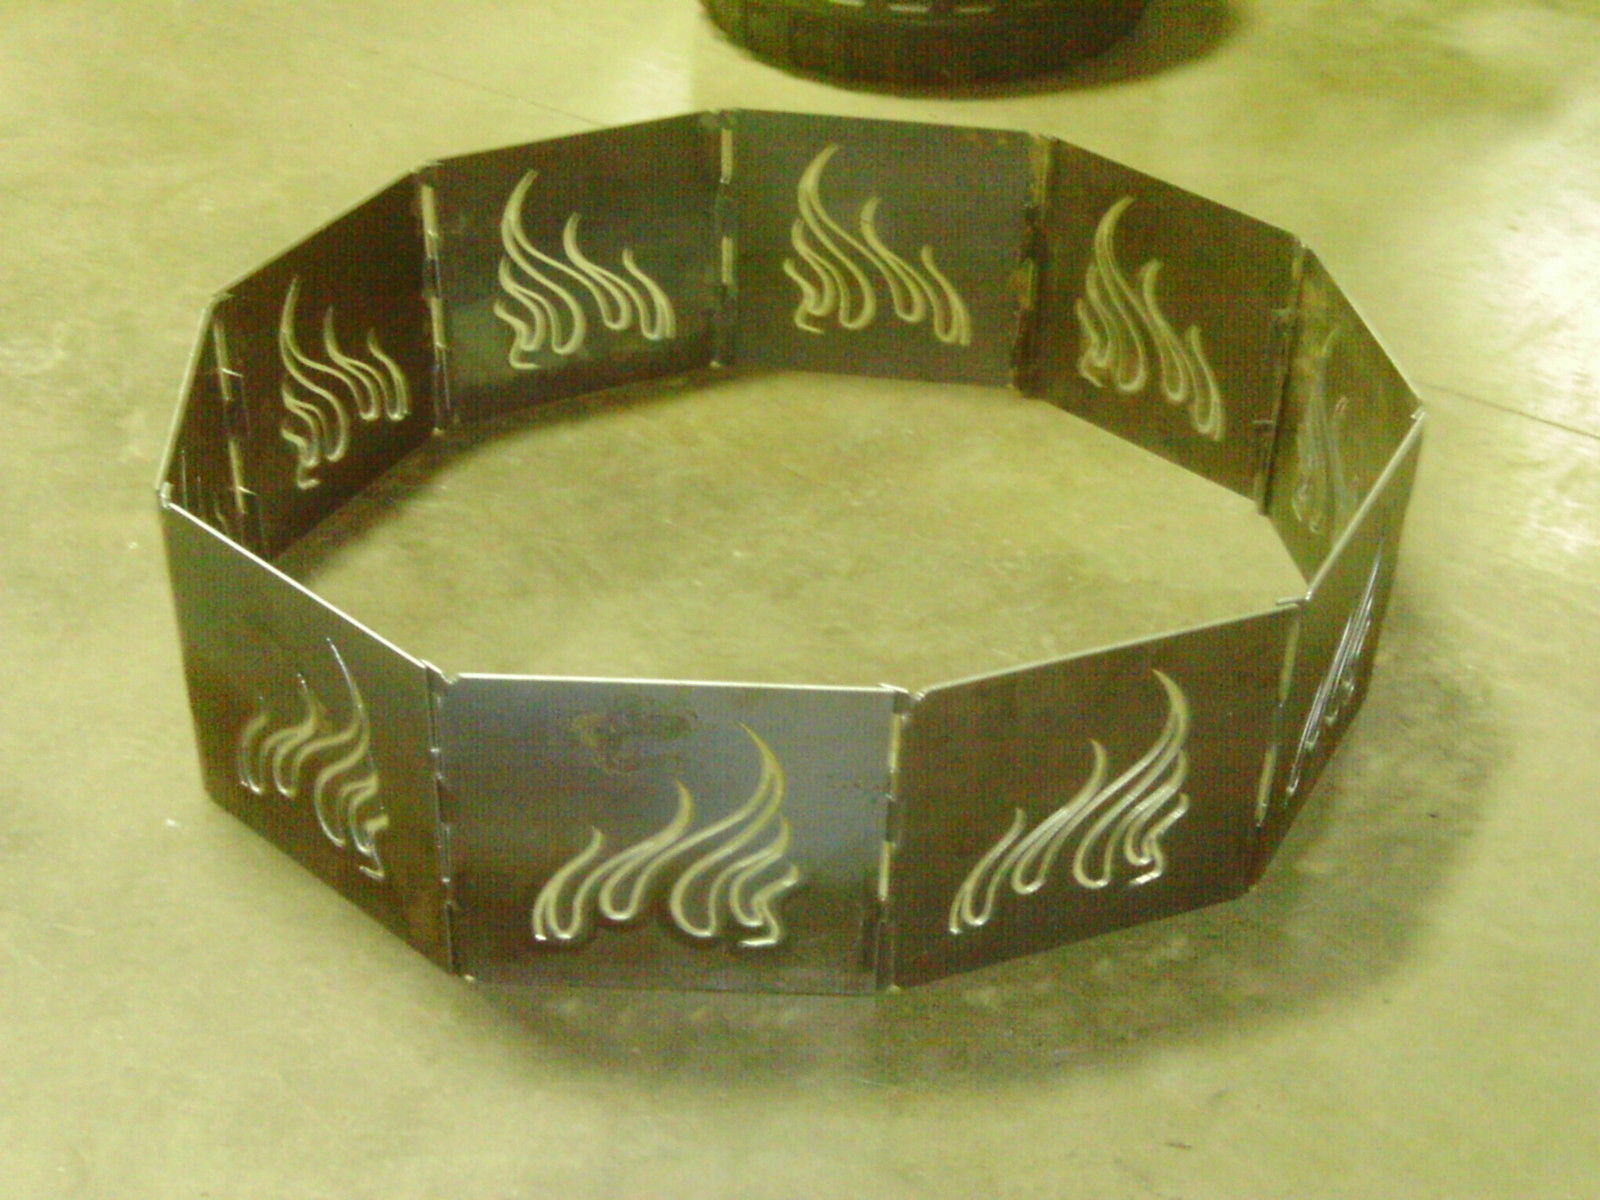 CAMPFIRE FIRE PIT RING 40